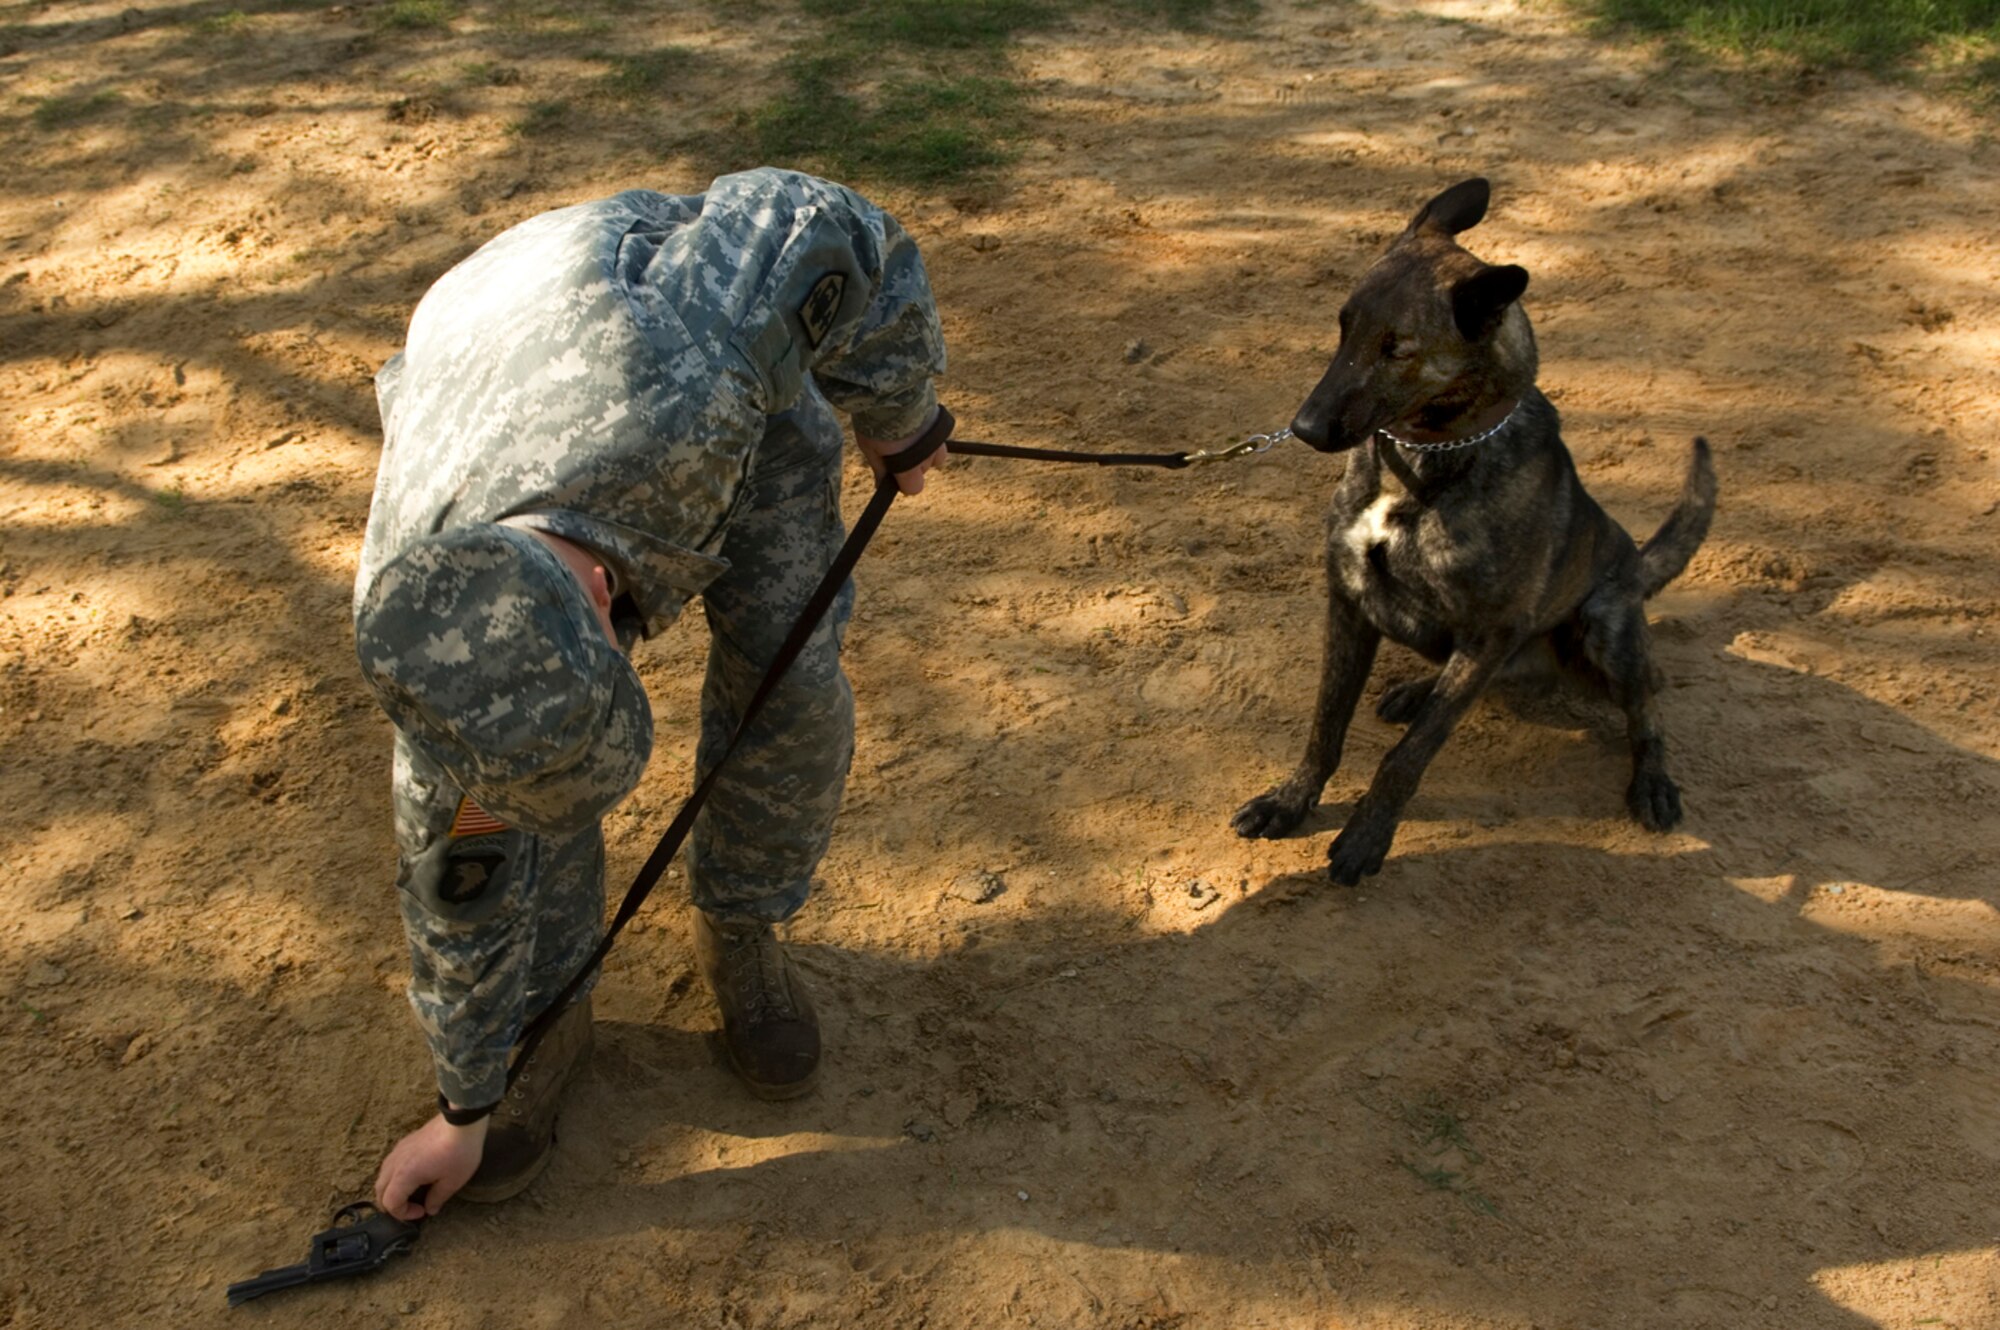 dog handler student Army Sgt. "Stoney" Stone, fires a pistol, then lays it down so the dog can sniff it. Getting military working dogs used to the sound of gunfire is part of their training. (photo by Tech. Sgt. Matthew Hannen)